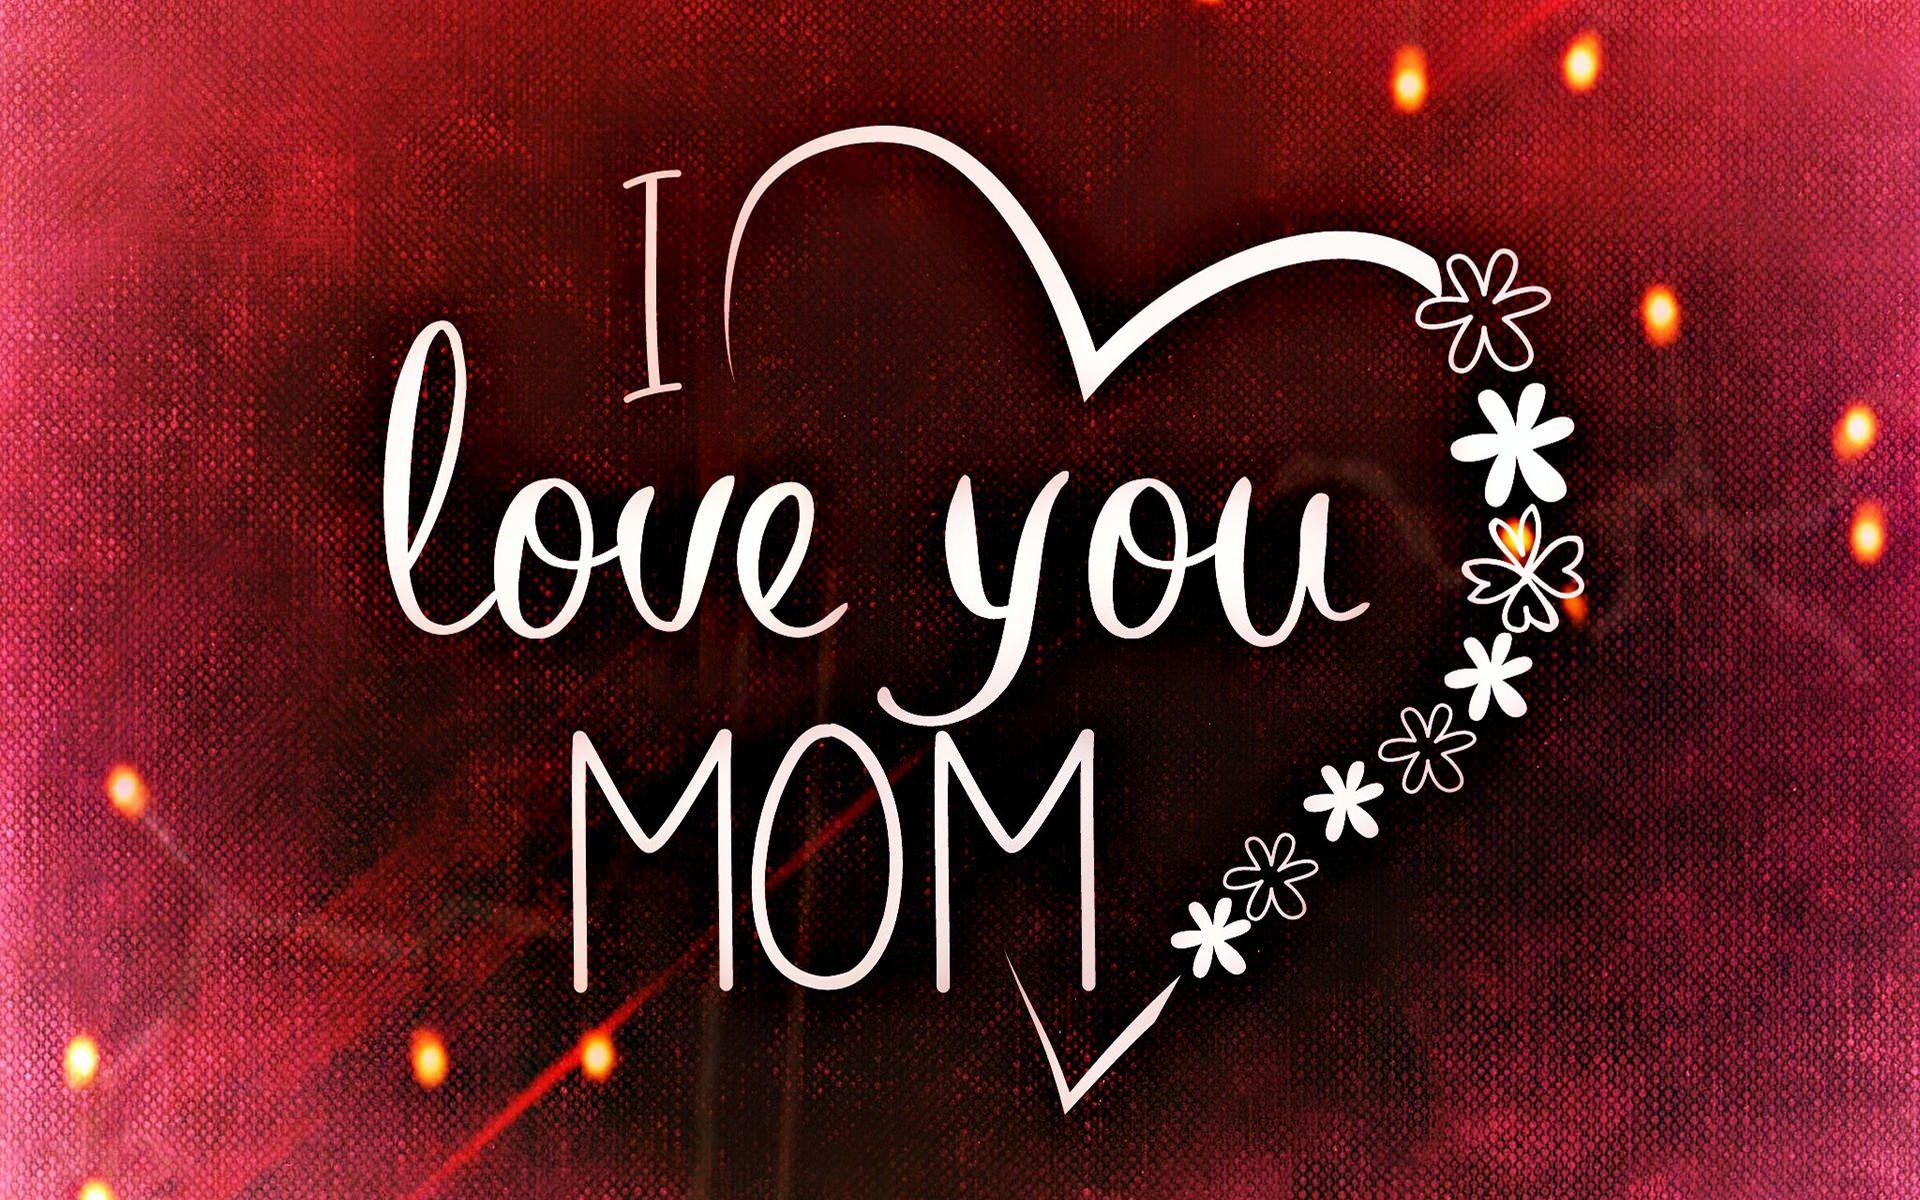 Happy Mothers day quotes Image Wallpaper Download 2018, I Love U